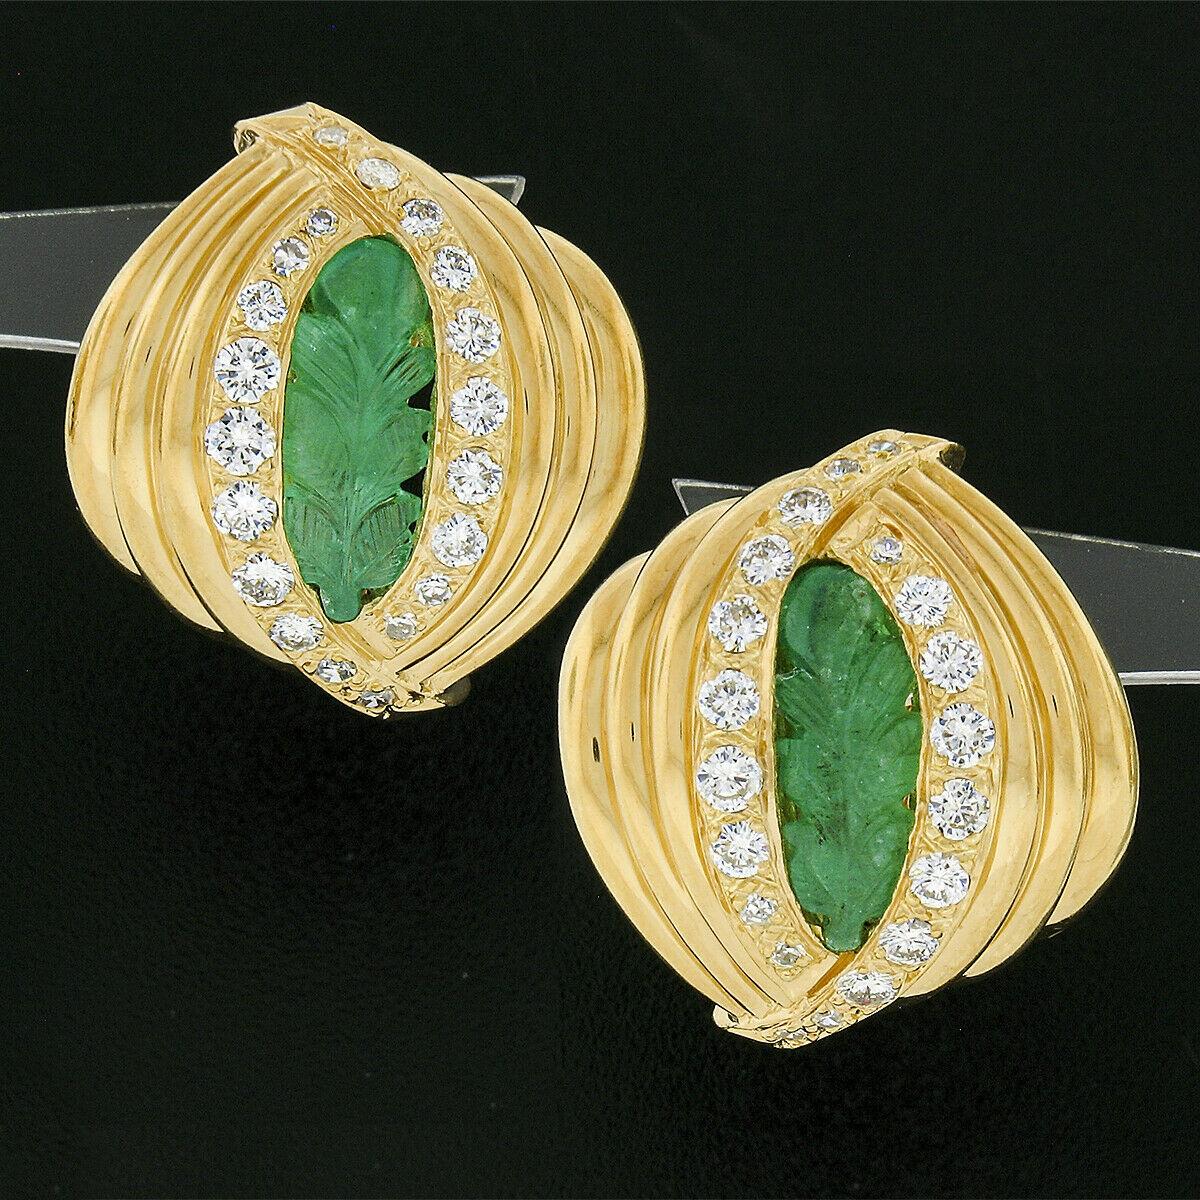 Here we have an absolutely elegant pair of vintage earrings that are crafted from solid 18k yellow gold featuring a domed and grooved design with a carved natural emerald gemstone at their center that are nicely framed with very fine quality